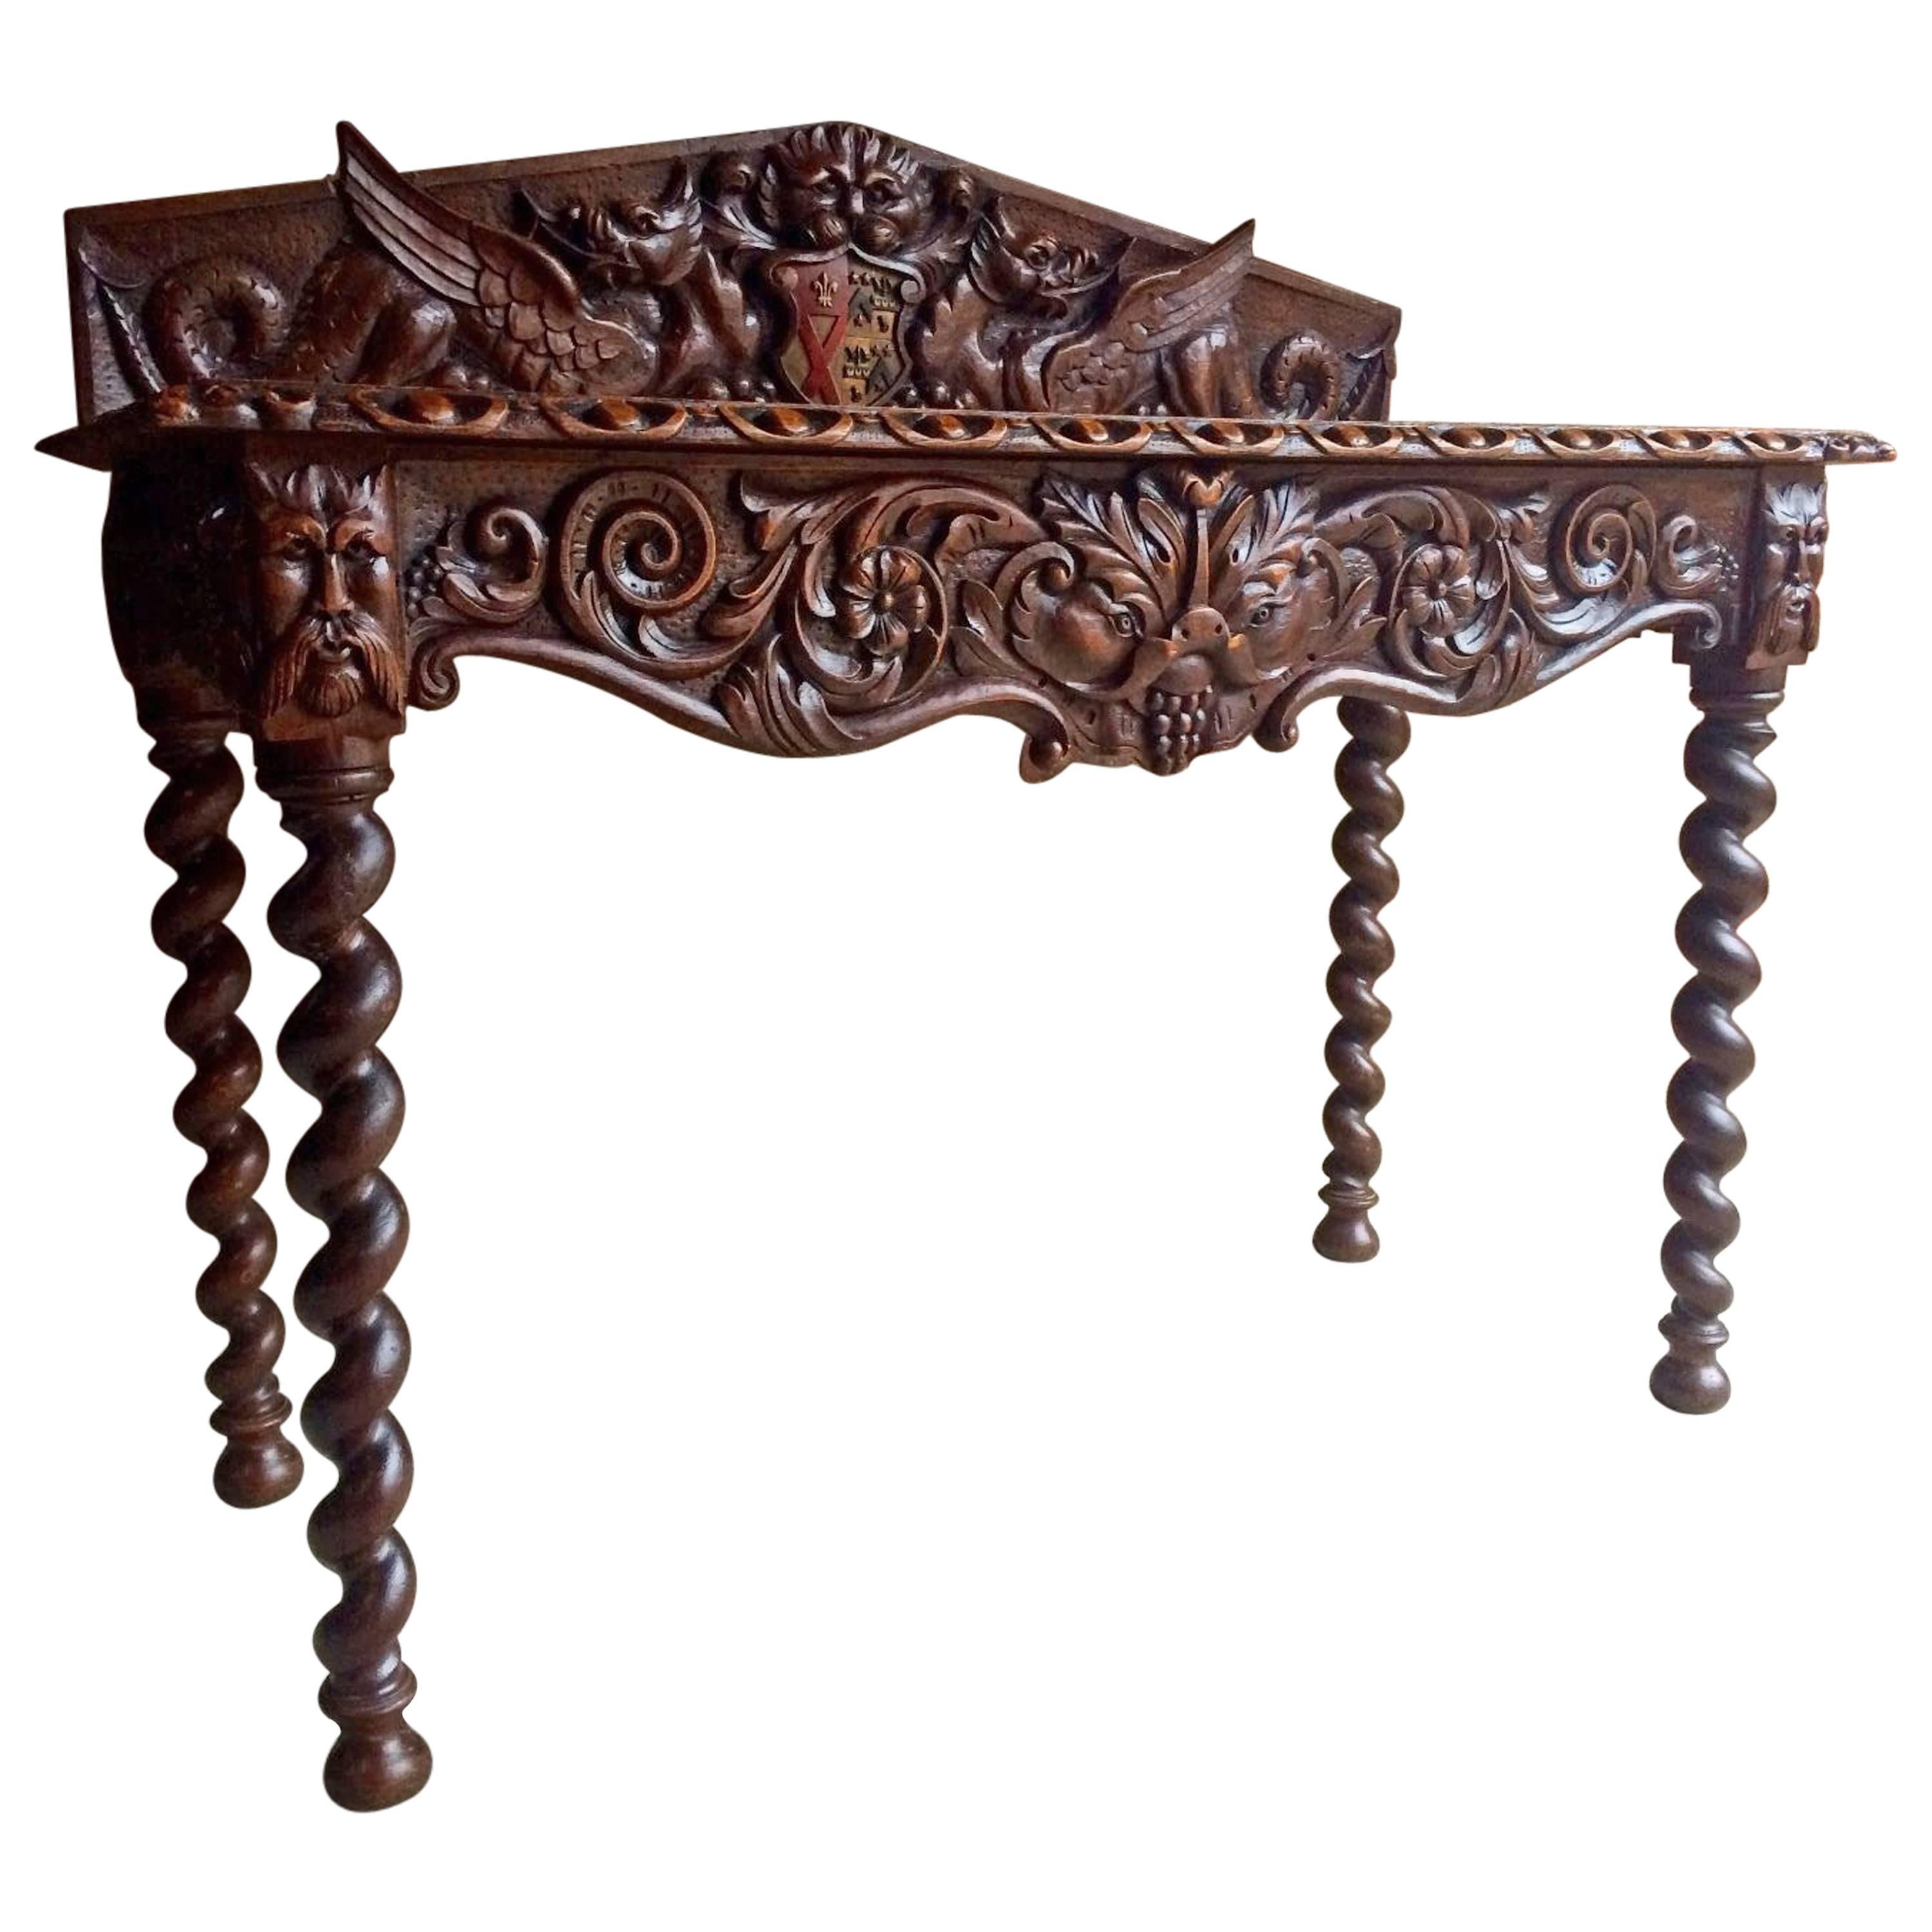 Antique Side Table Gothic Heavily Carved 19th Century Hall, circa 1890